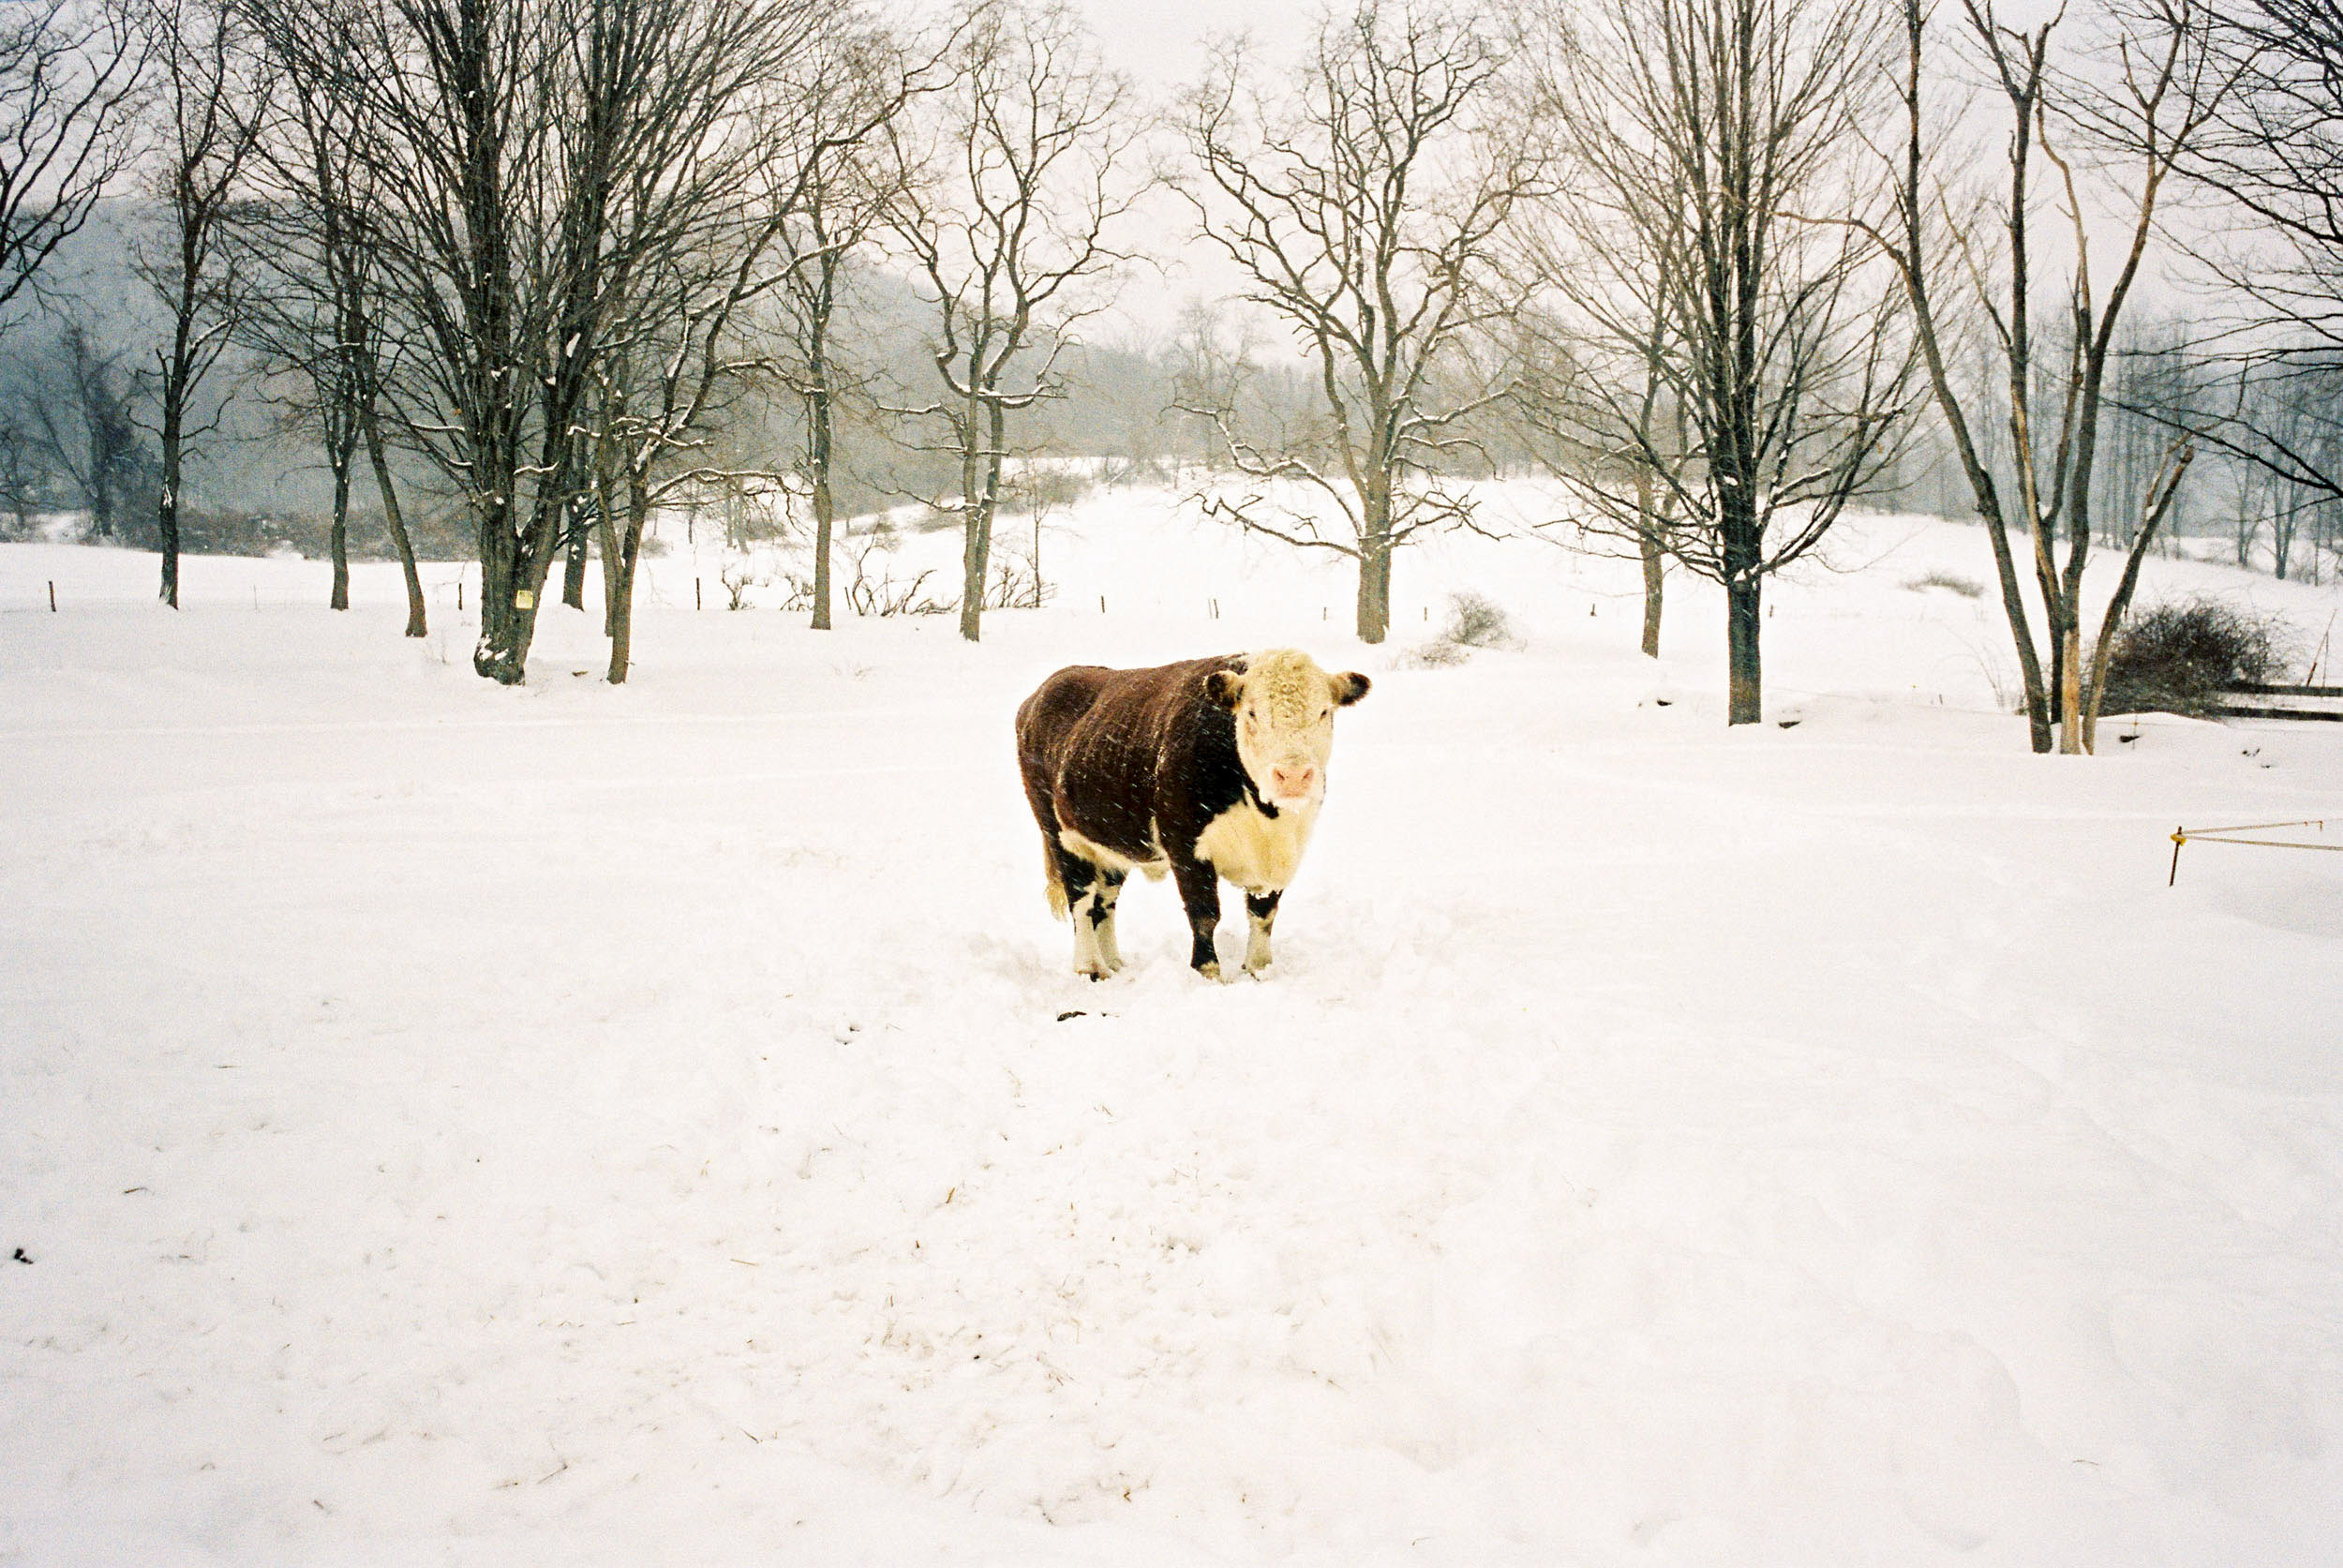 A-LONELY-BULL-WEATHERS-A-SNOW-STORM-IN-UPSTATE-NEW-YORK